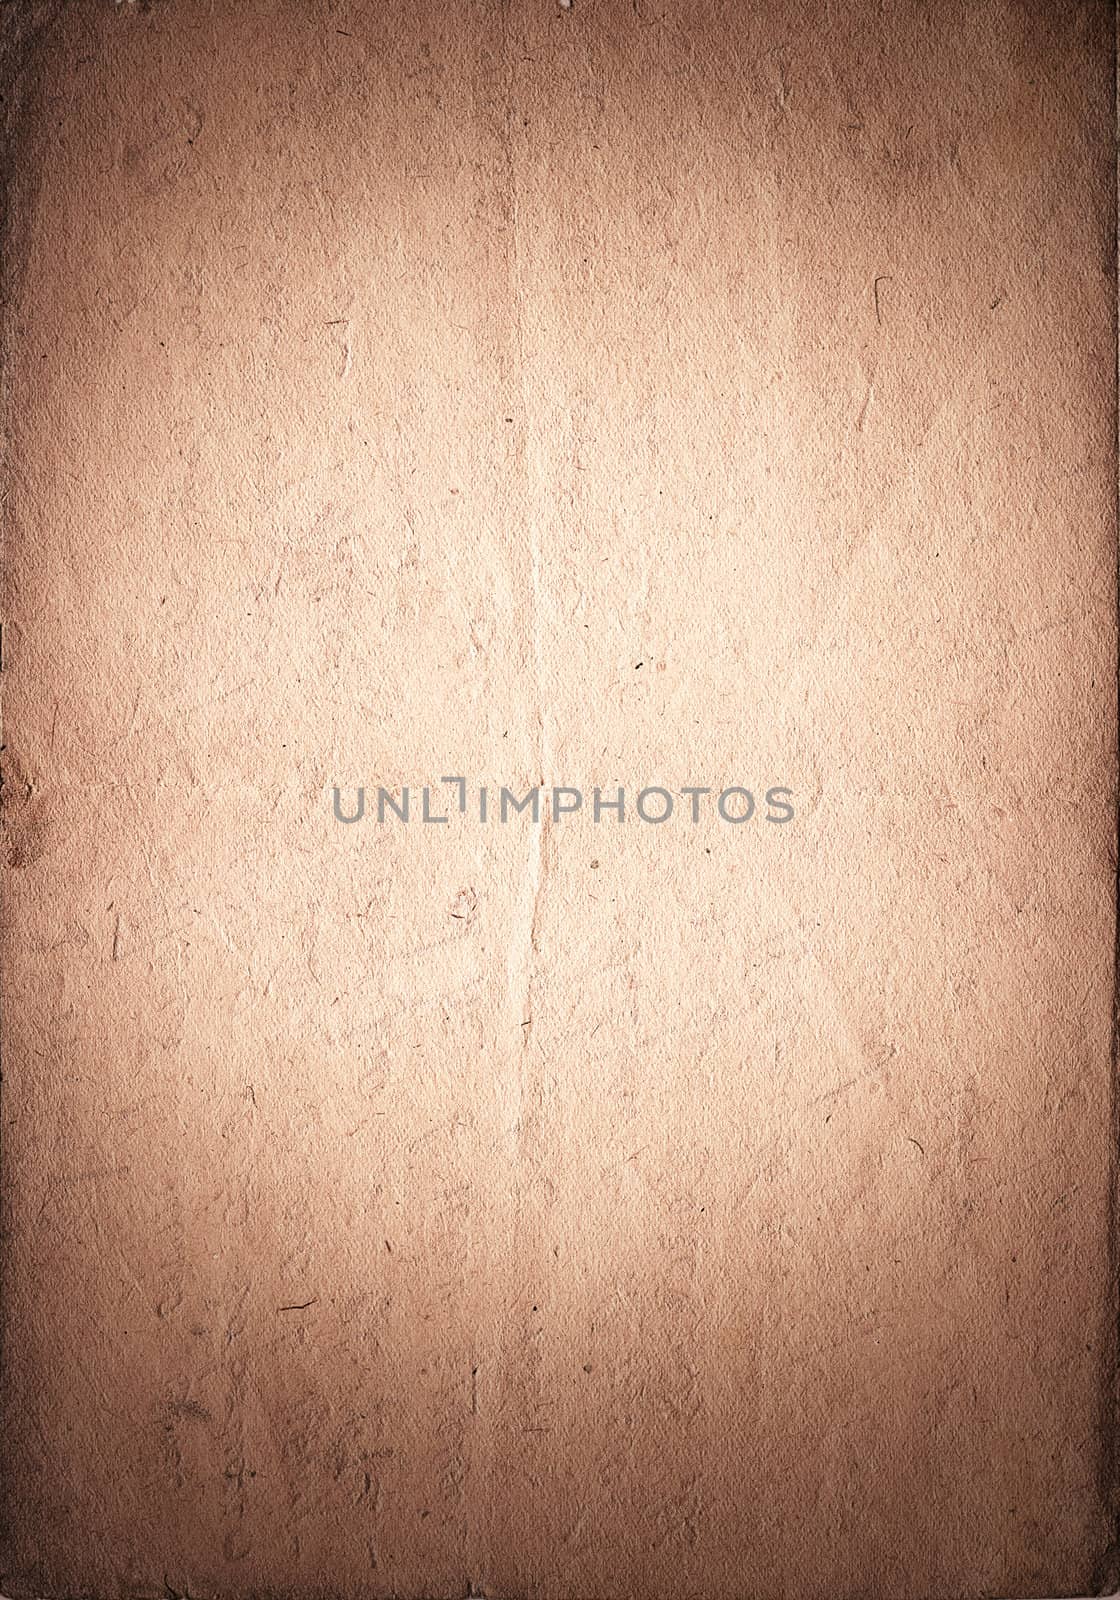 Vintage paper with vignette and light spot in the center. Brown color. Vertical orient.